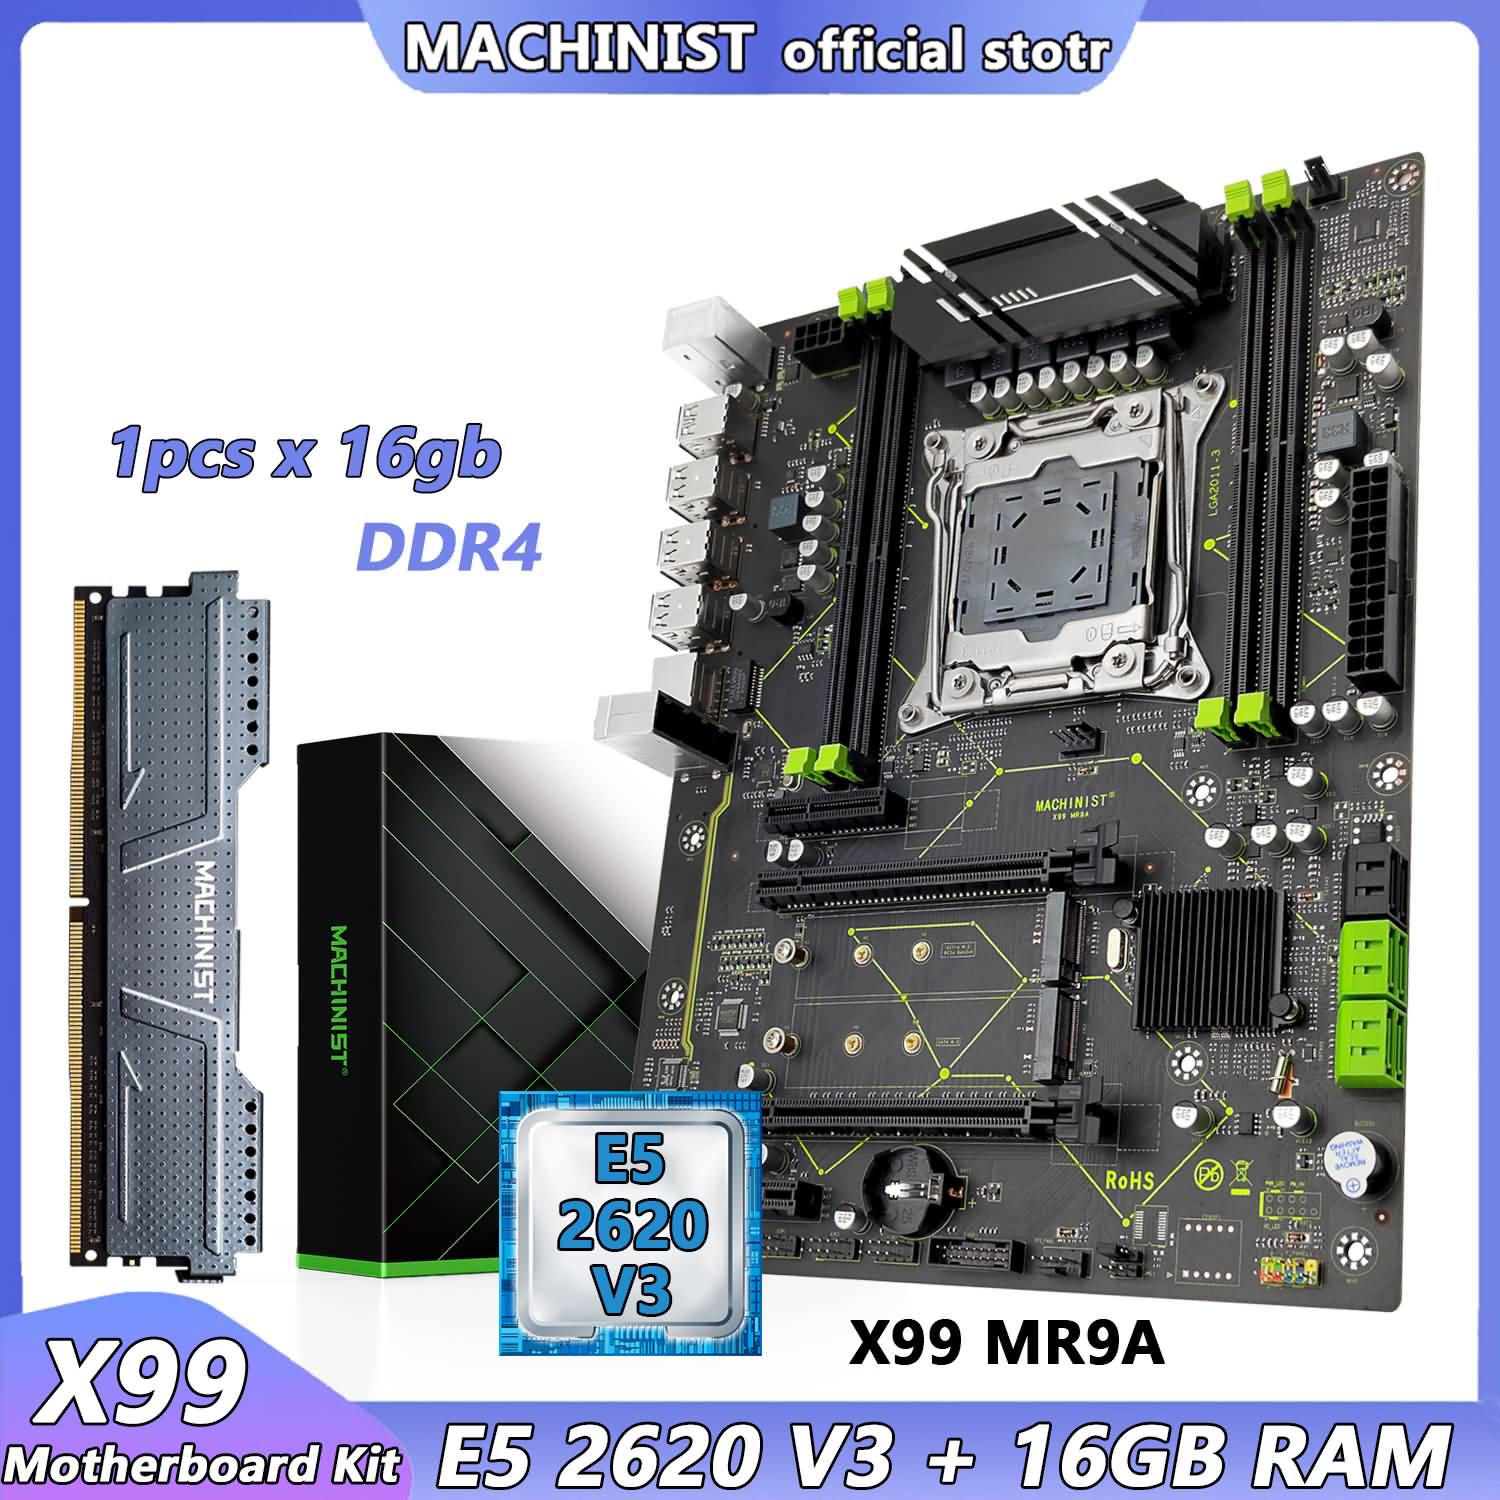 Buy Machinist X99 Motherboard With Xeon E5 2620 V3 CPU Online!